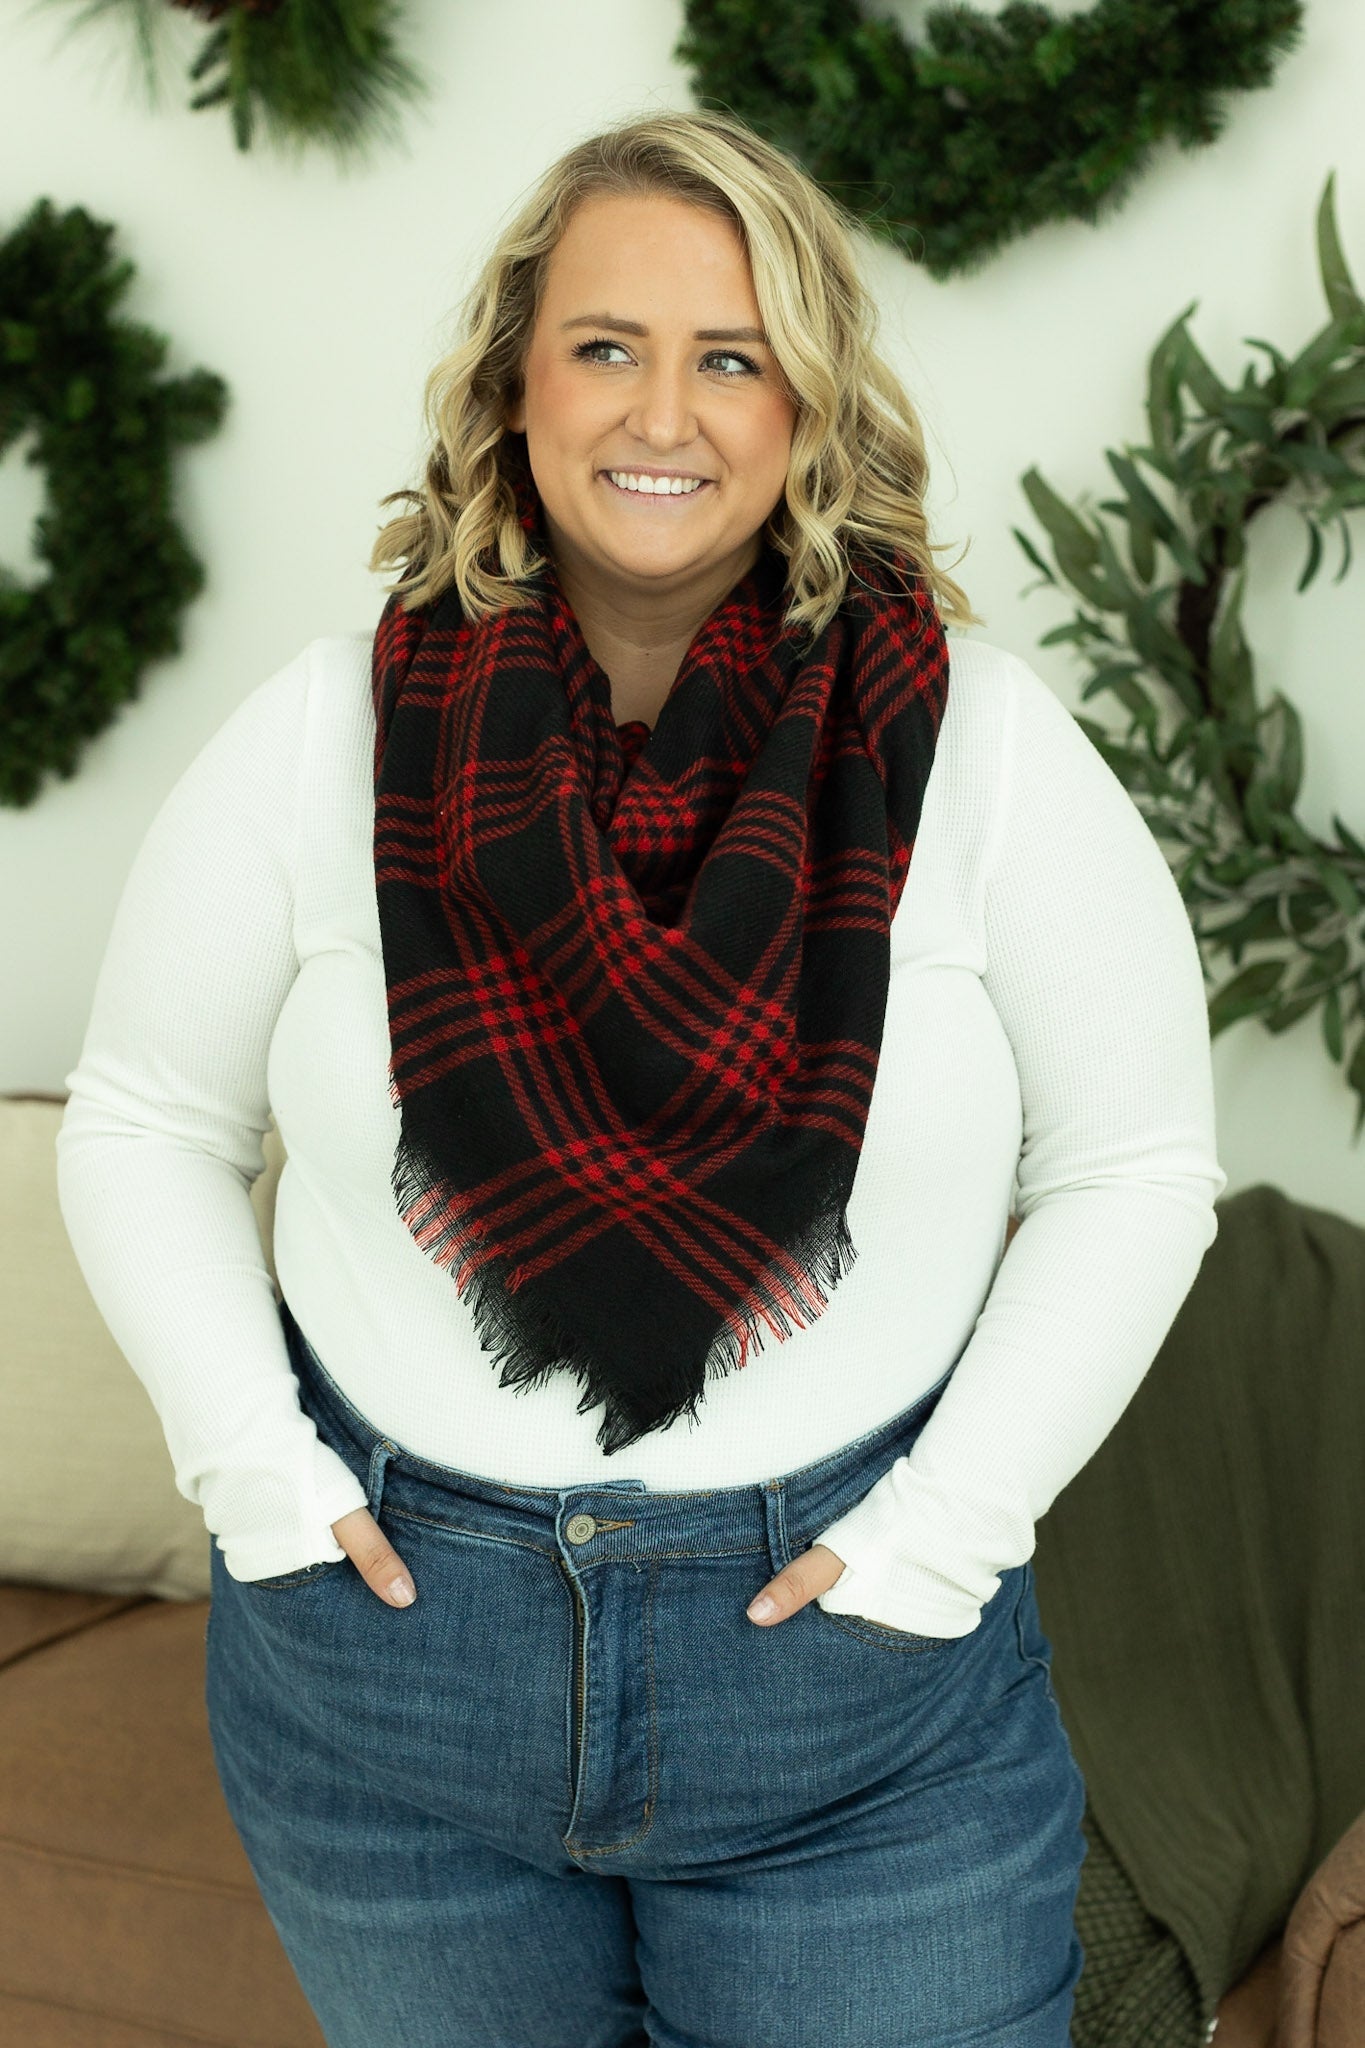 Blanket Scarf - Red and Black Plaid